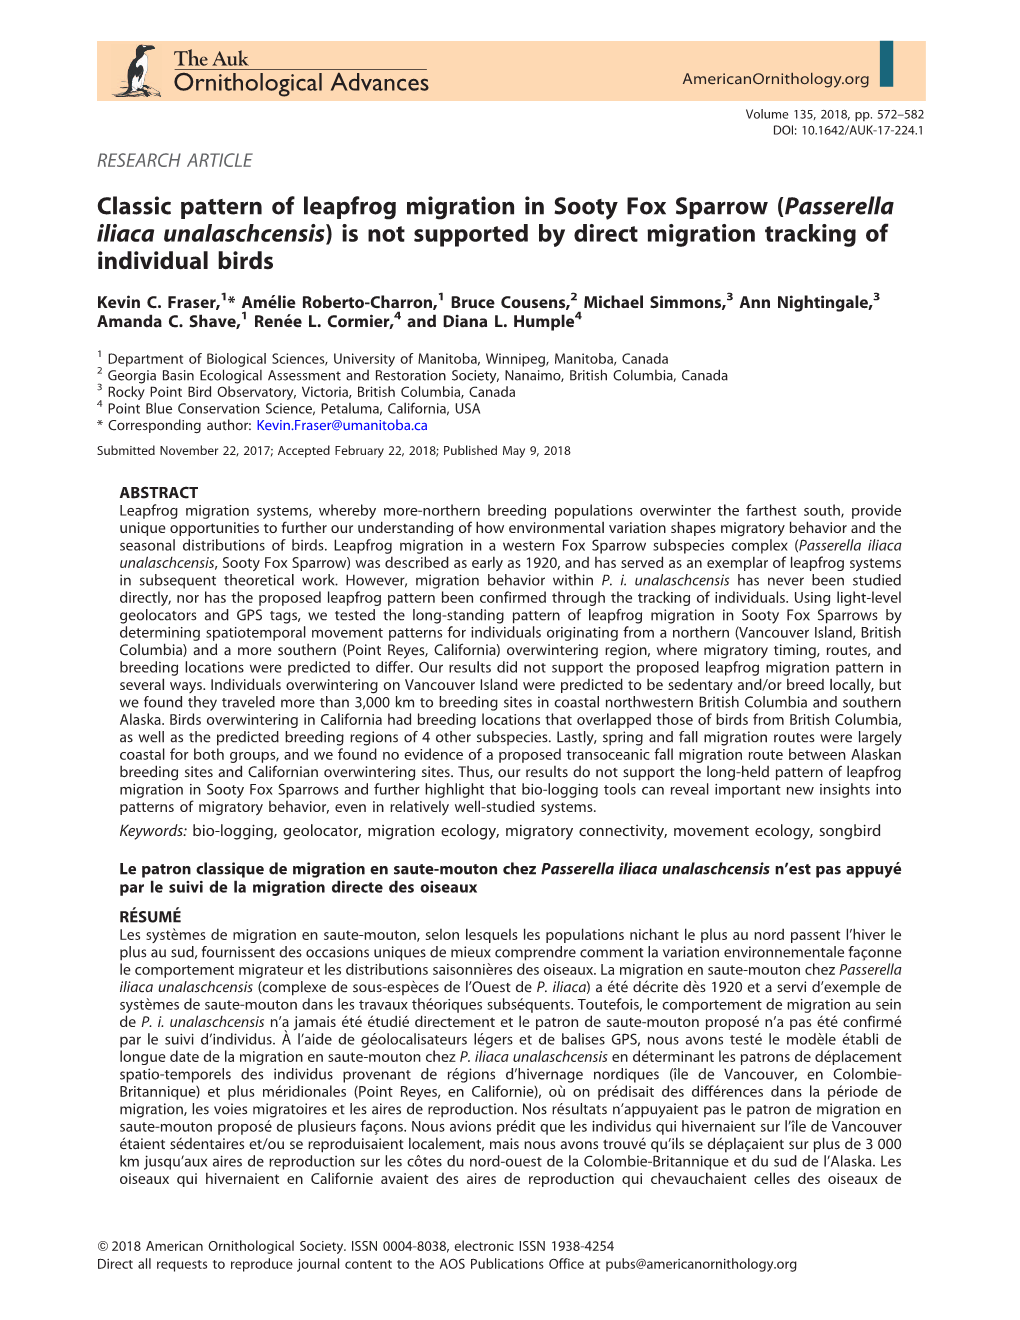 Classic Pattern of Leapfrog Migration in Sooty Fox Sparrow (Passerella Iliaca Unalaschcensis) Is Not Supported by Direct Migration Tracking of Individual Birds